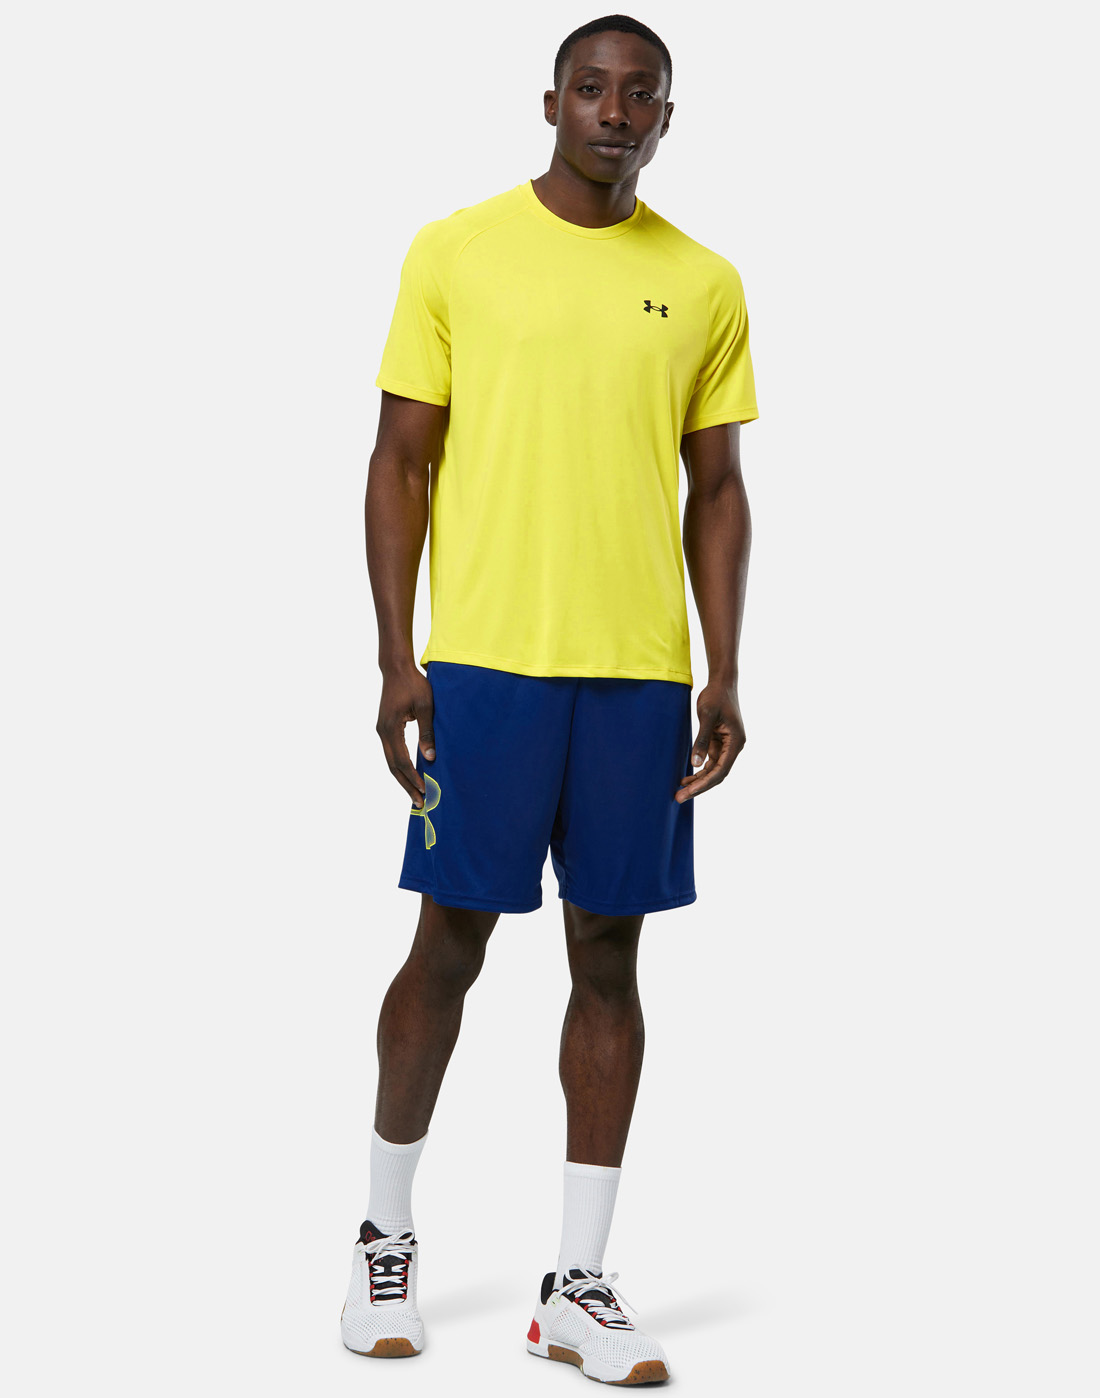 Under Armour Mens Tech 2.0 T-Shirt - Yellow | Life Style Sports IE